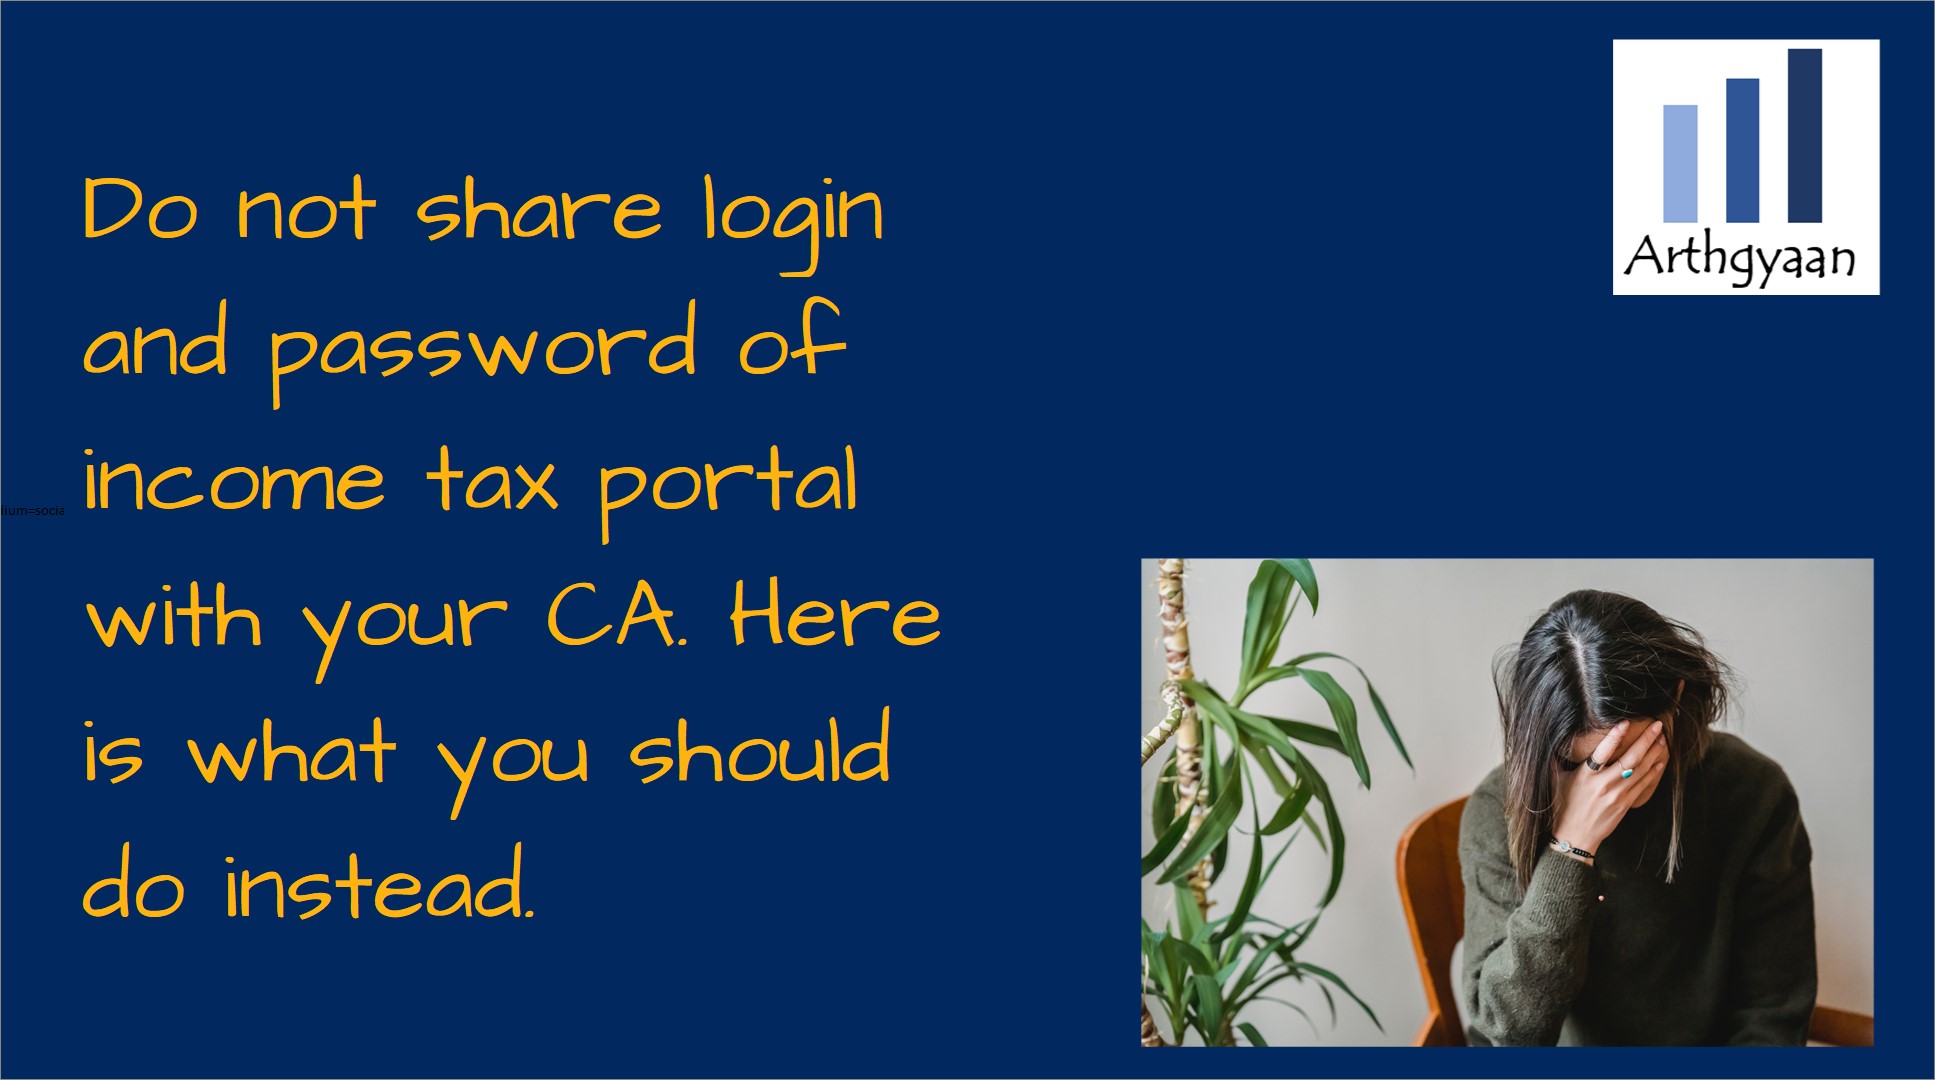 Do not share login and password of income tax portal with your CA. Here is what you should do instead.